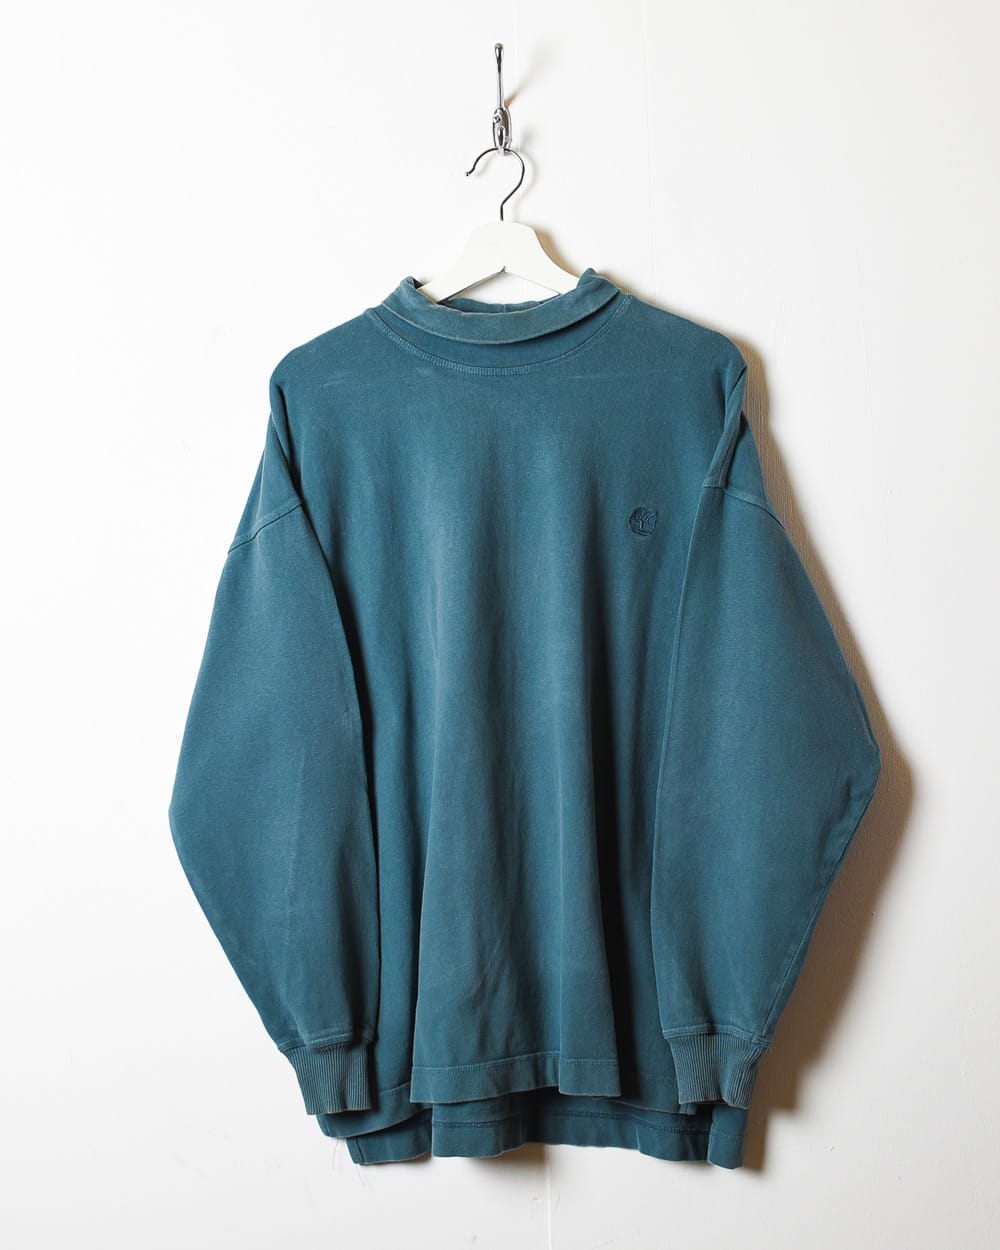 Blue Timberland Turtle Neck Long Sleeved T-Shirt - X-Large